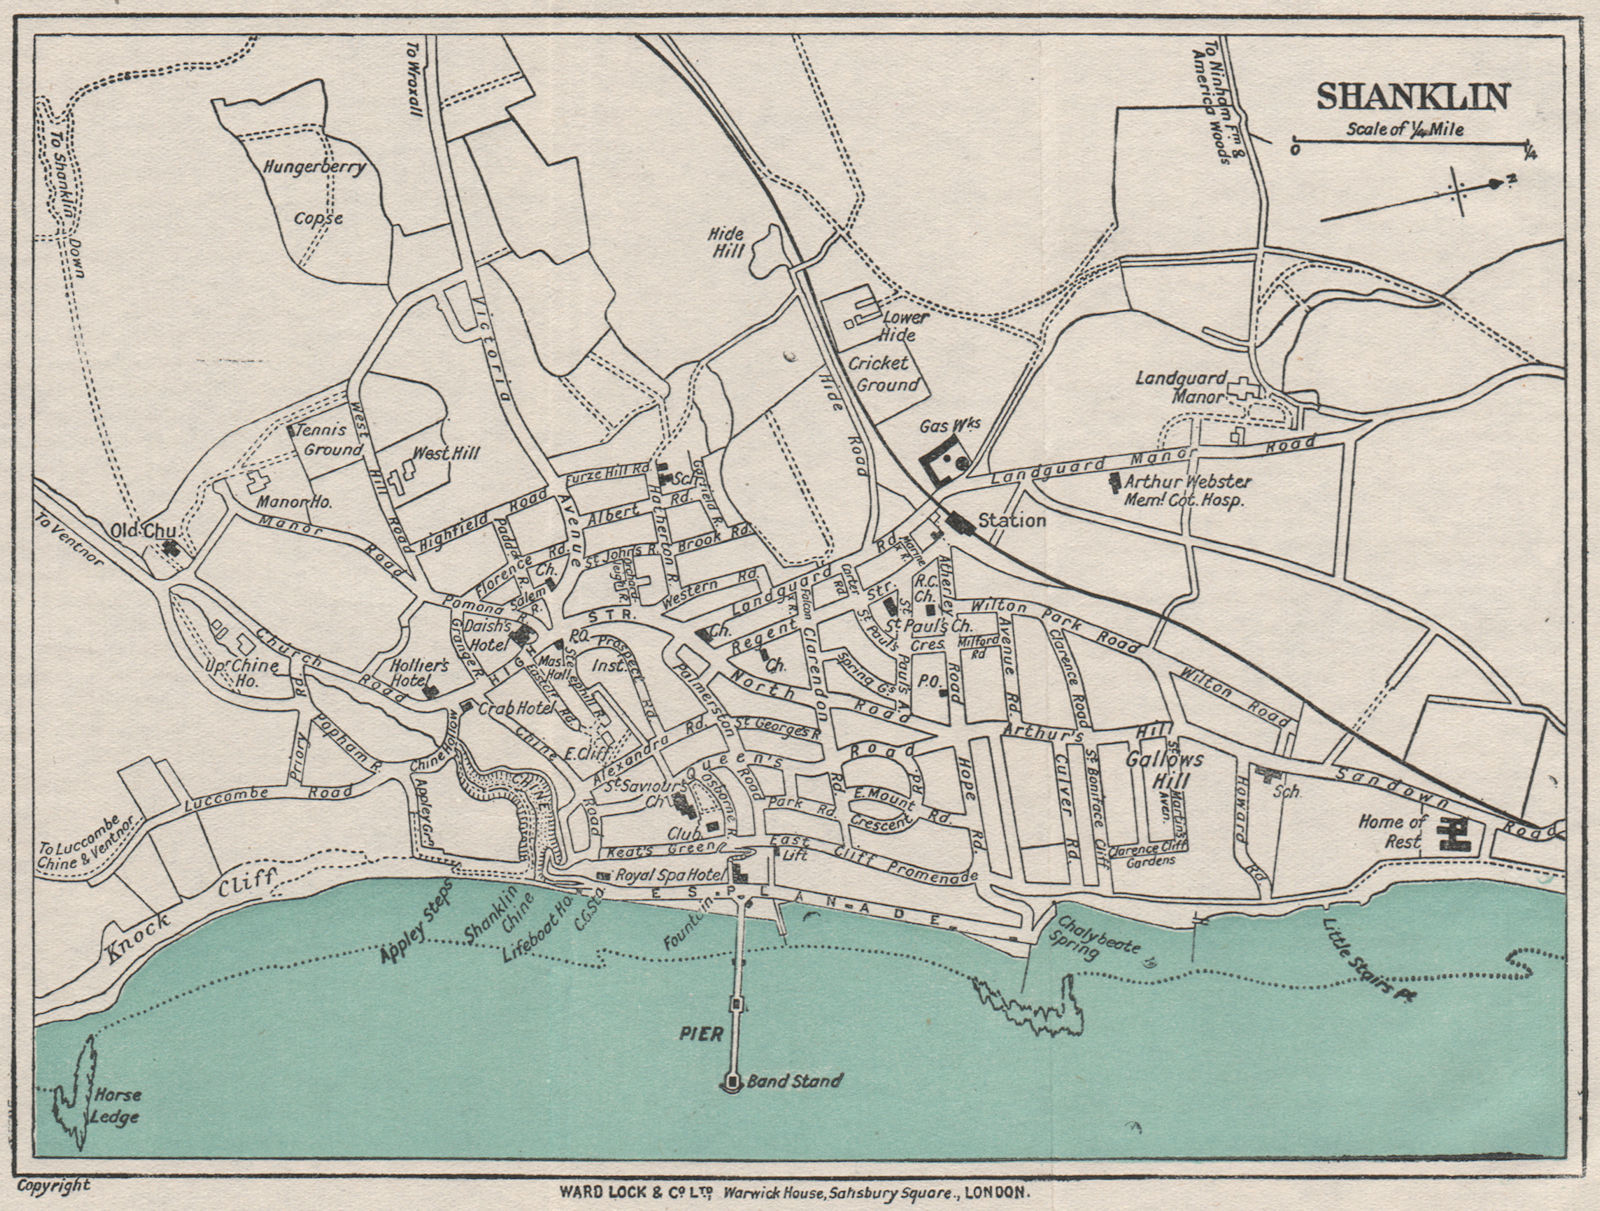 Associate Product SHANKLIN vintage town/city plan. Isle of Wight. WARD LOCK 1922 old antique map